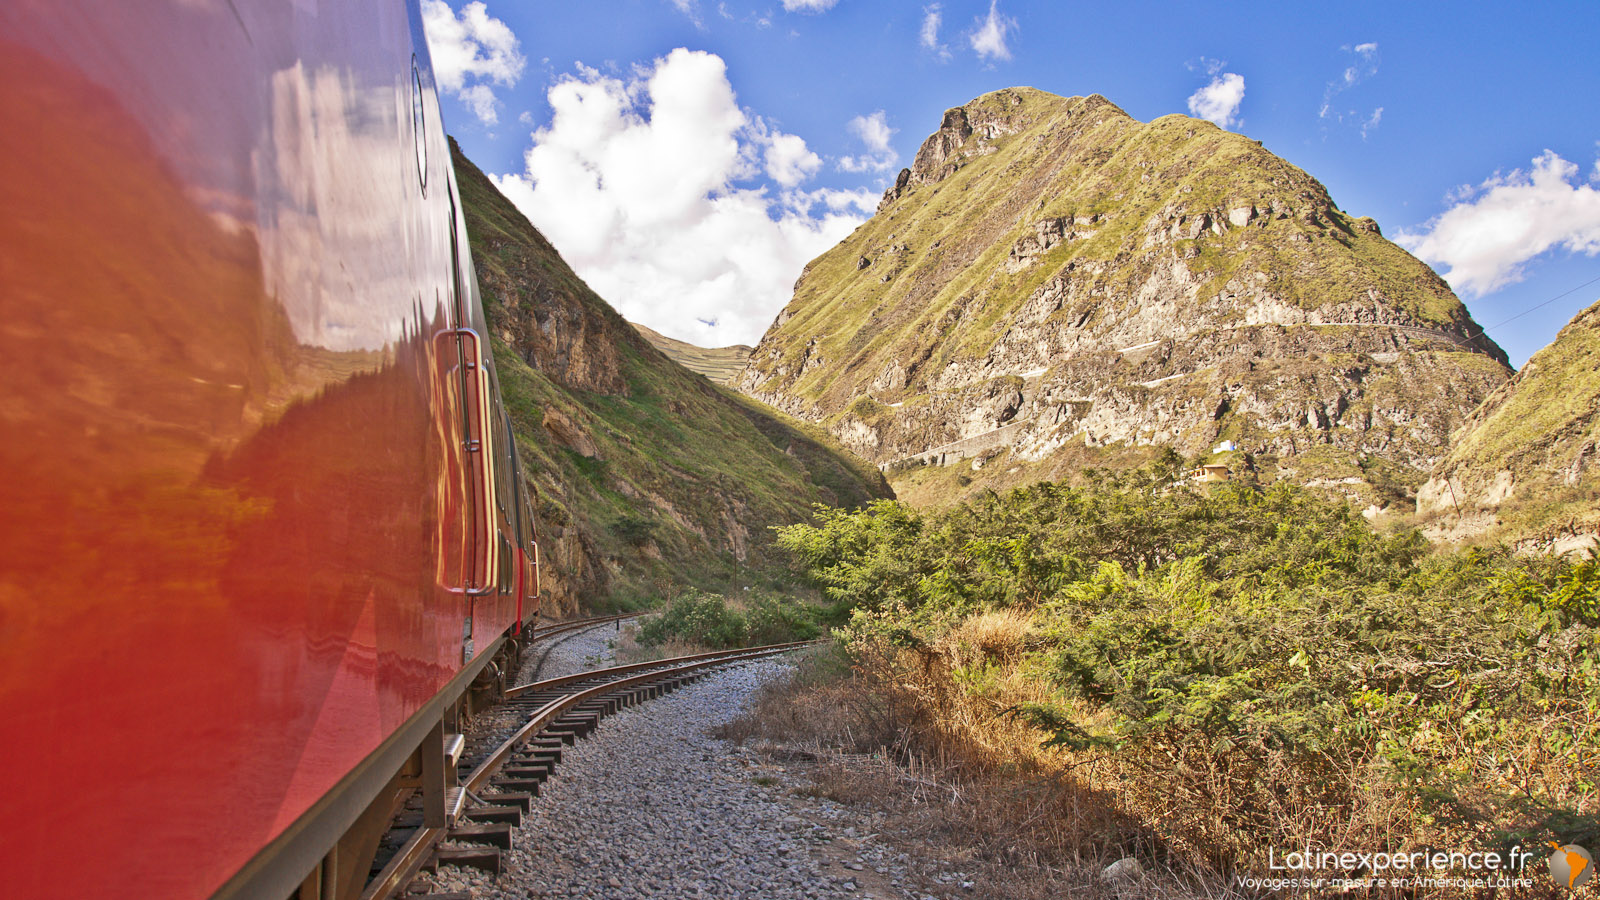 Equateur - Train Crucero - Latinexperience voyages